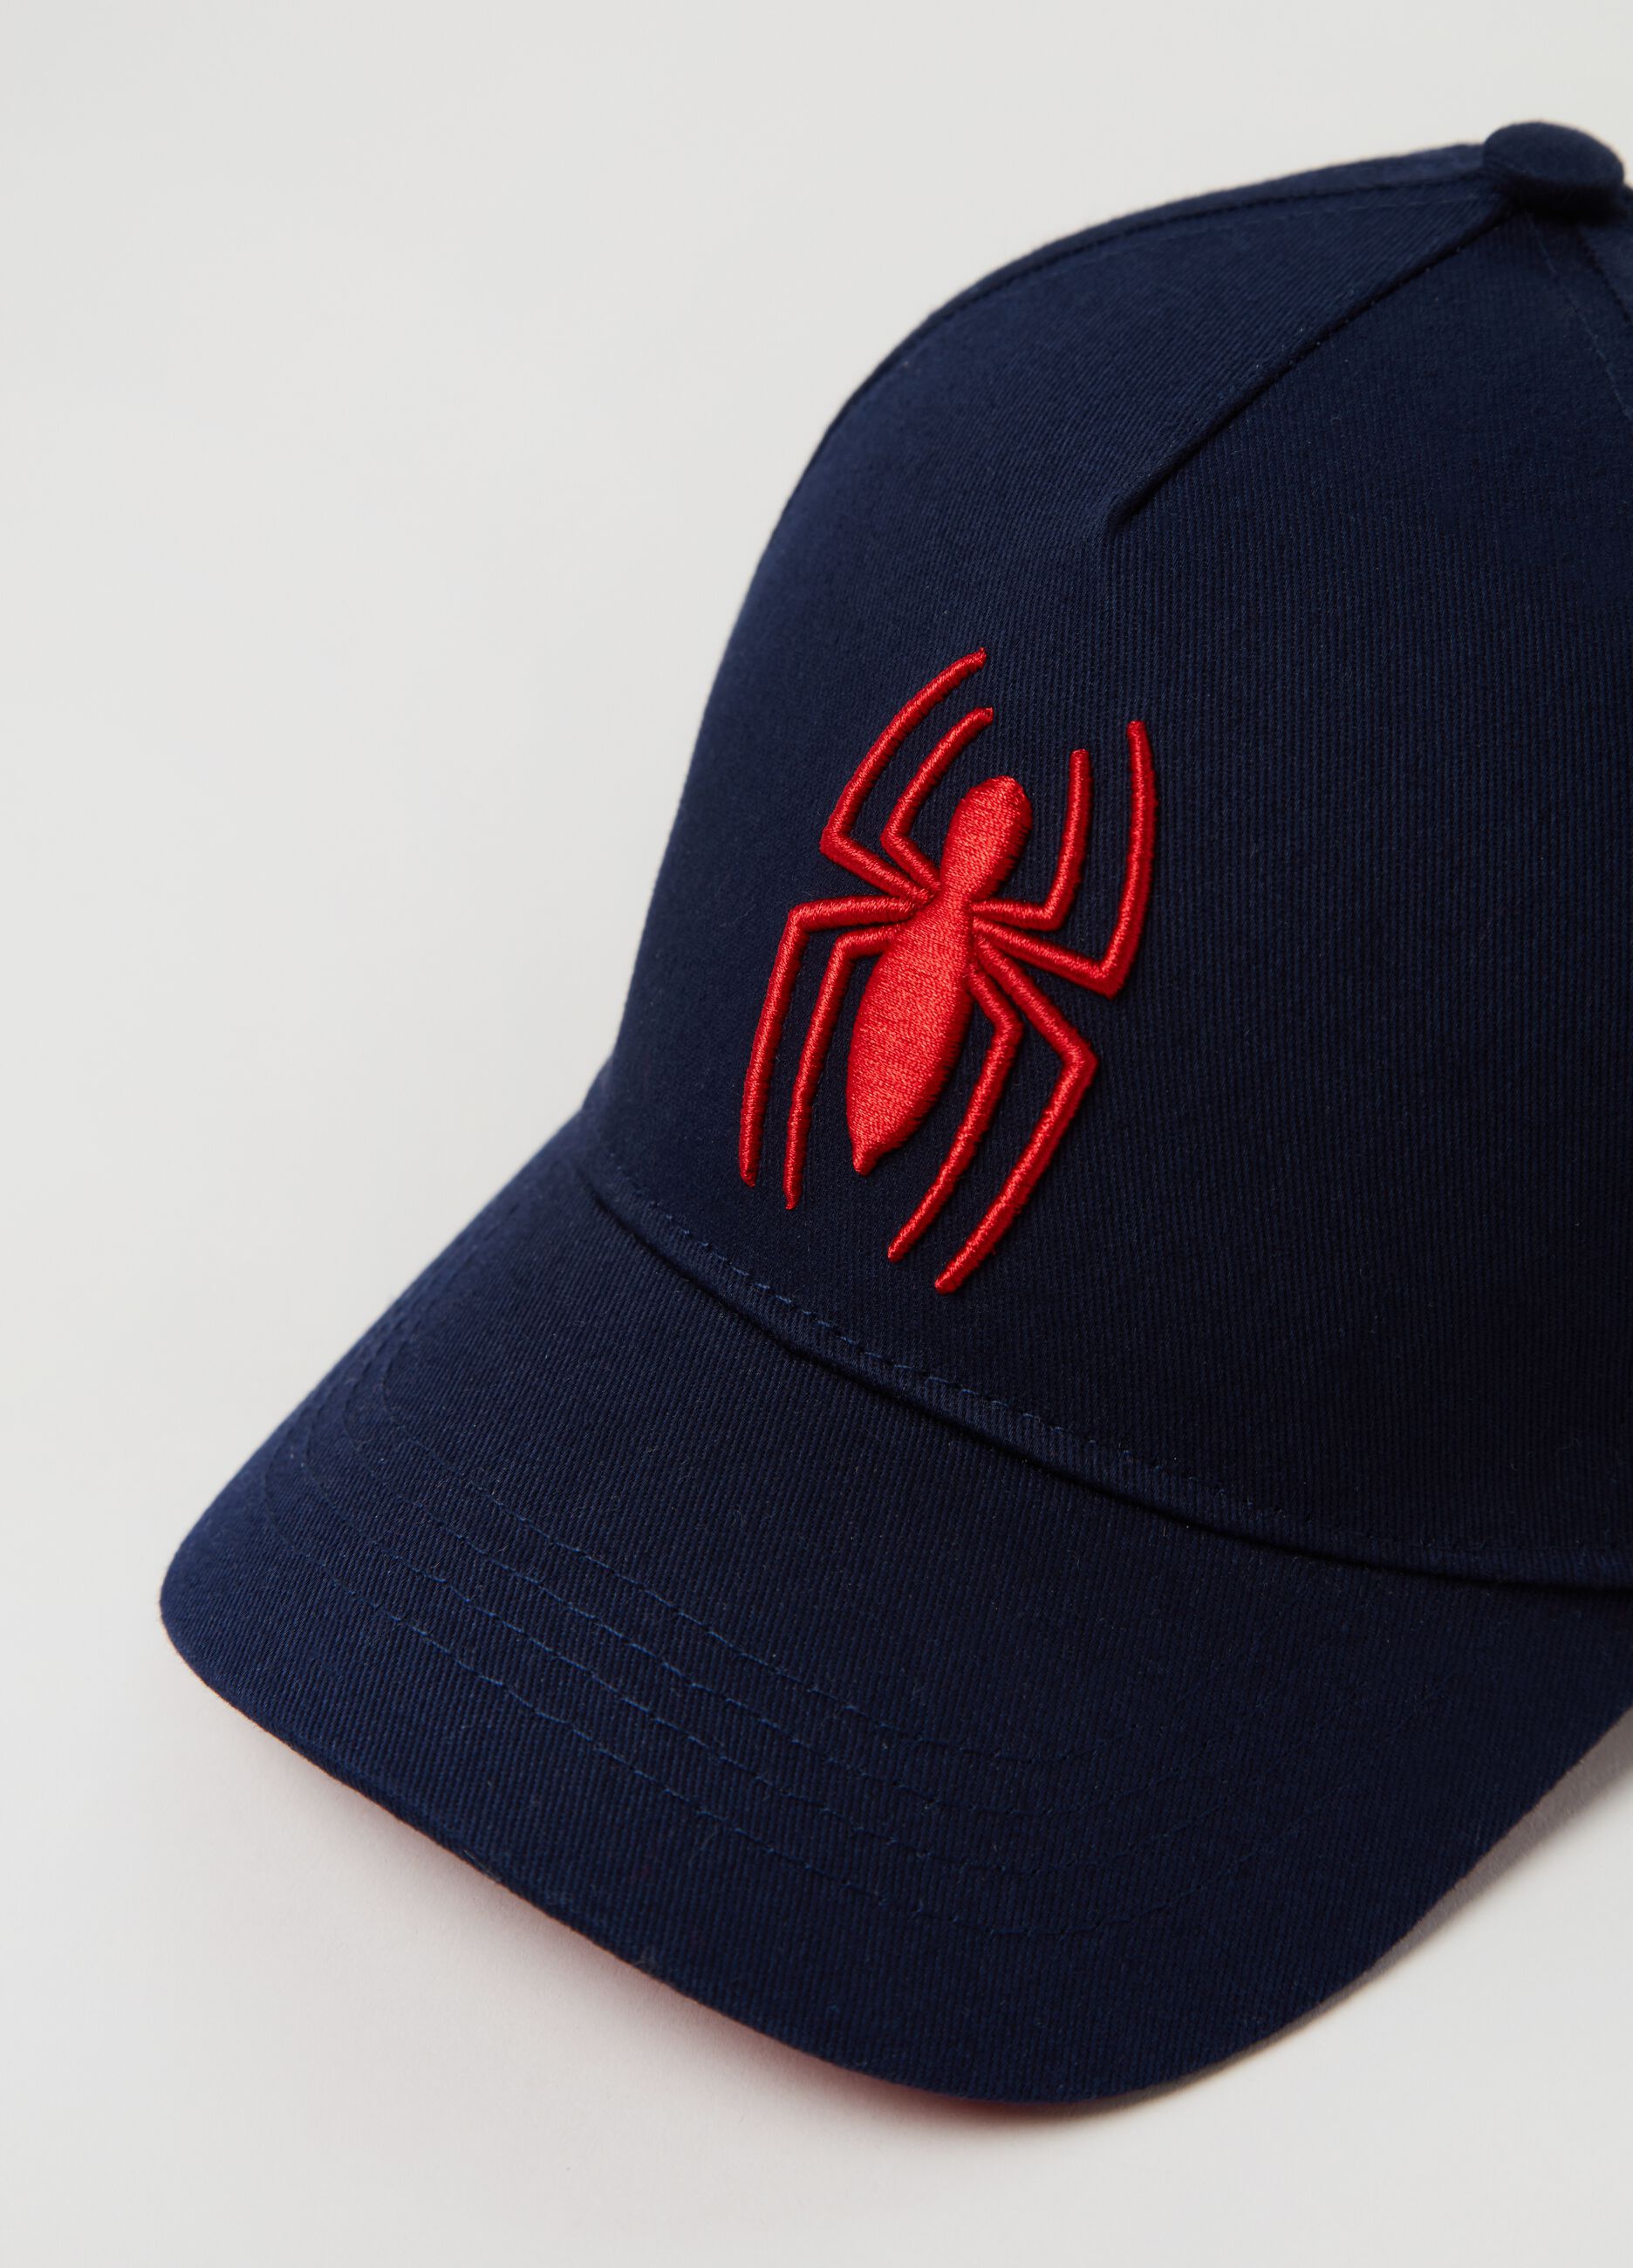 Baseball cap with Spider-Man embroidery